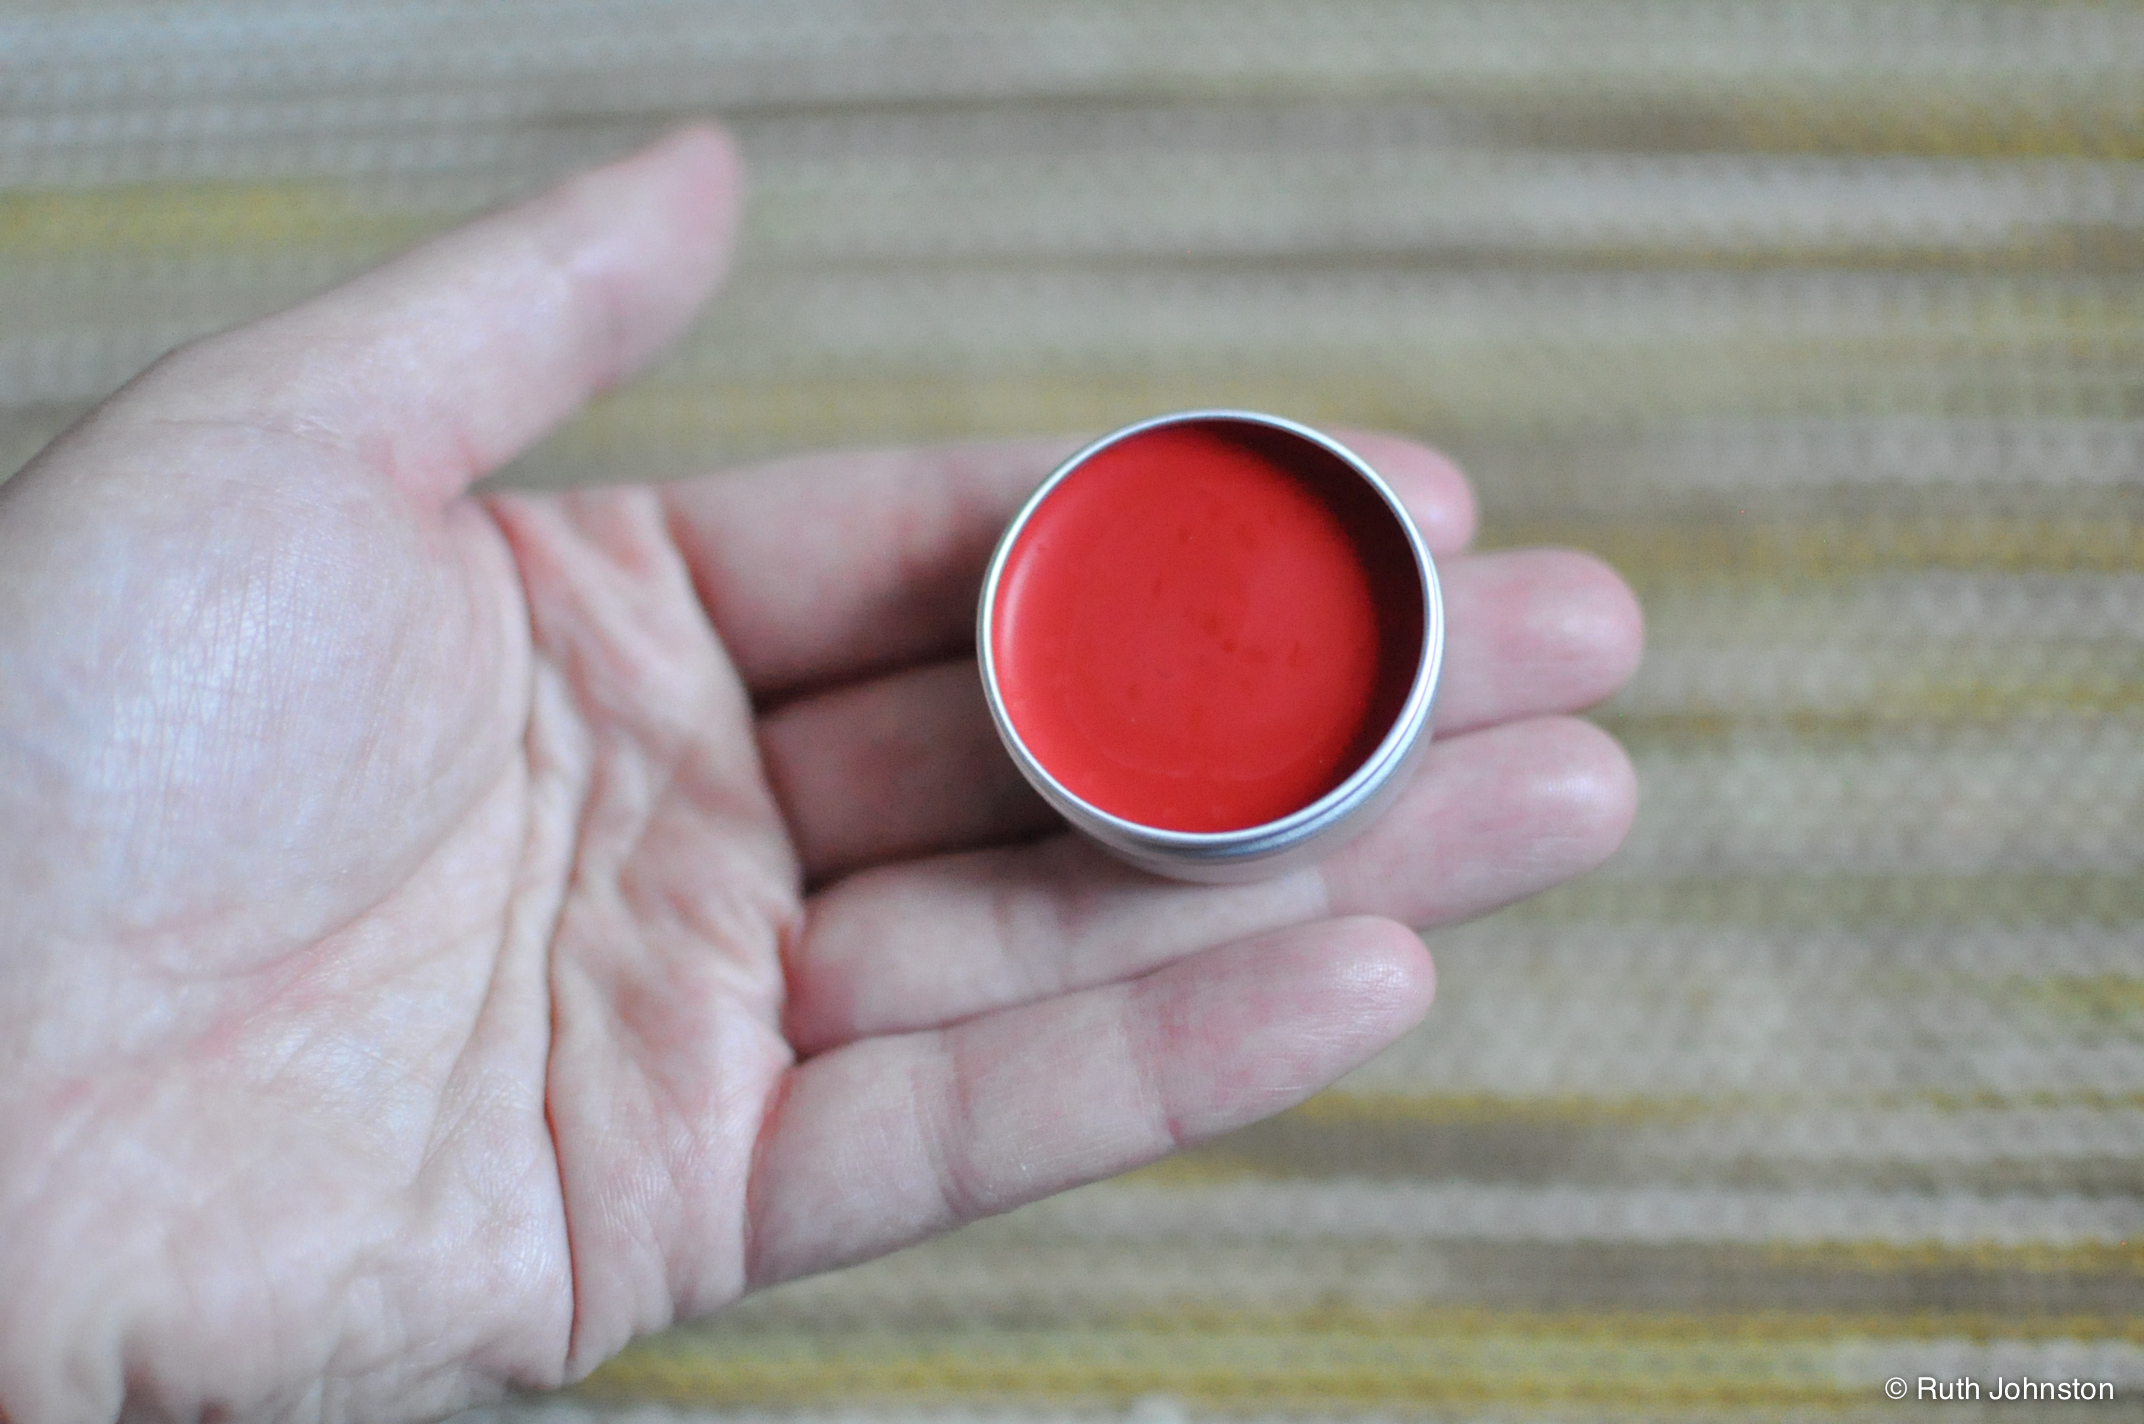 a man's hand holding a small red ring